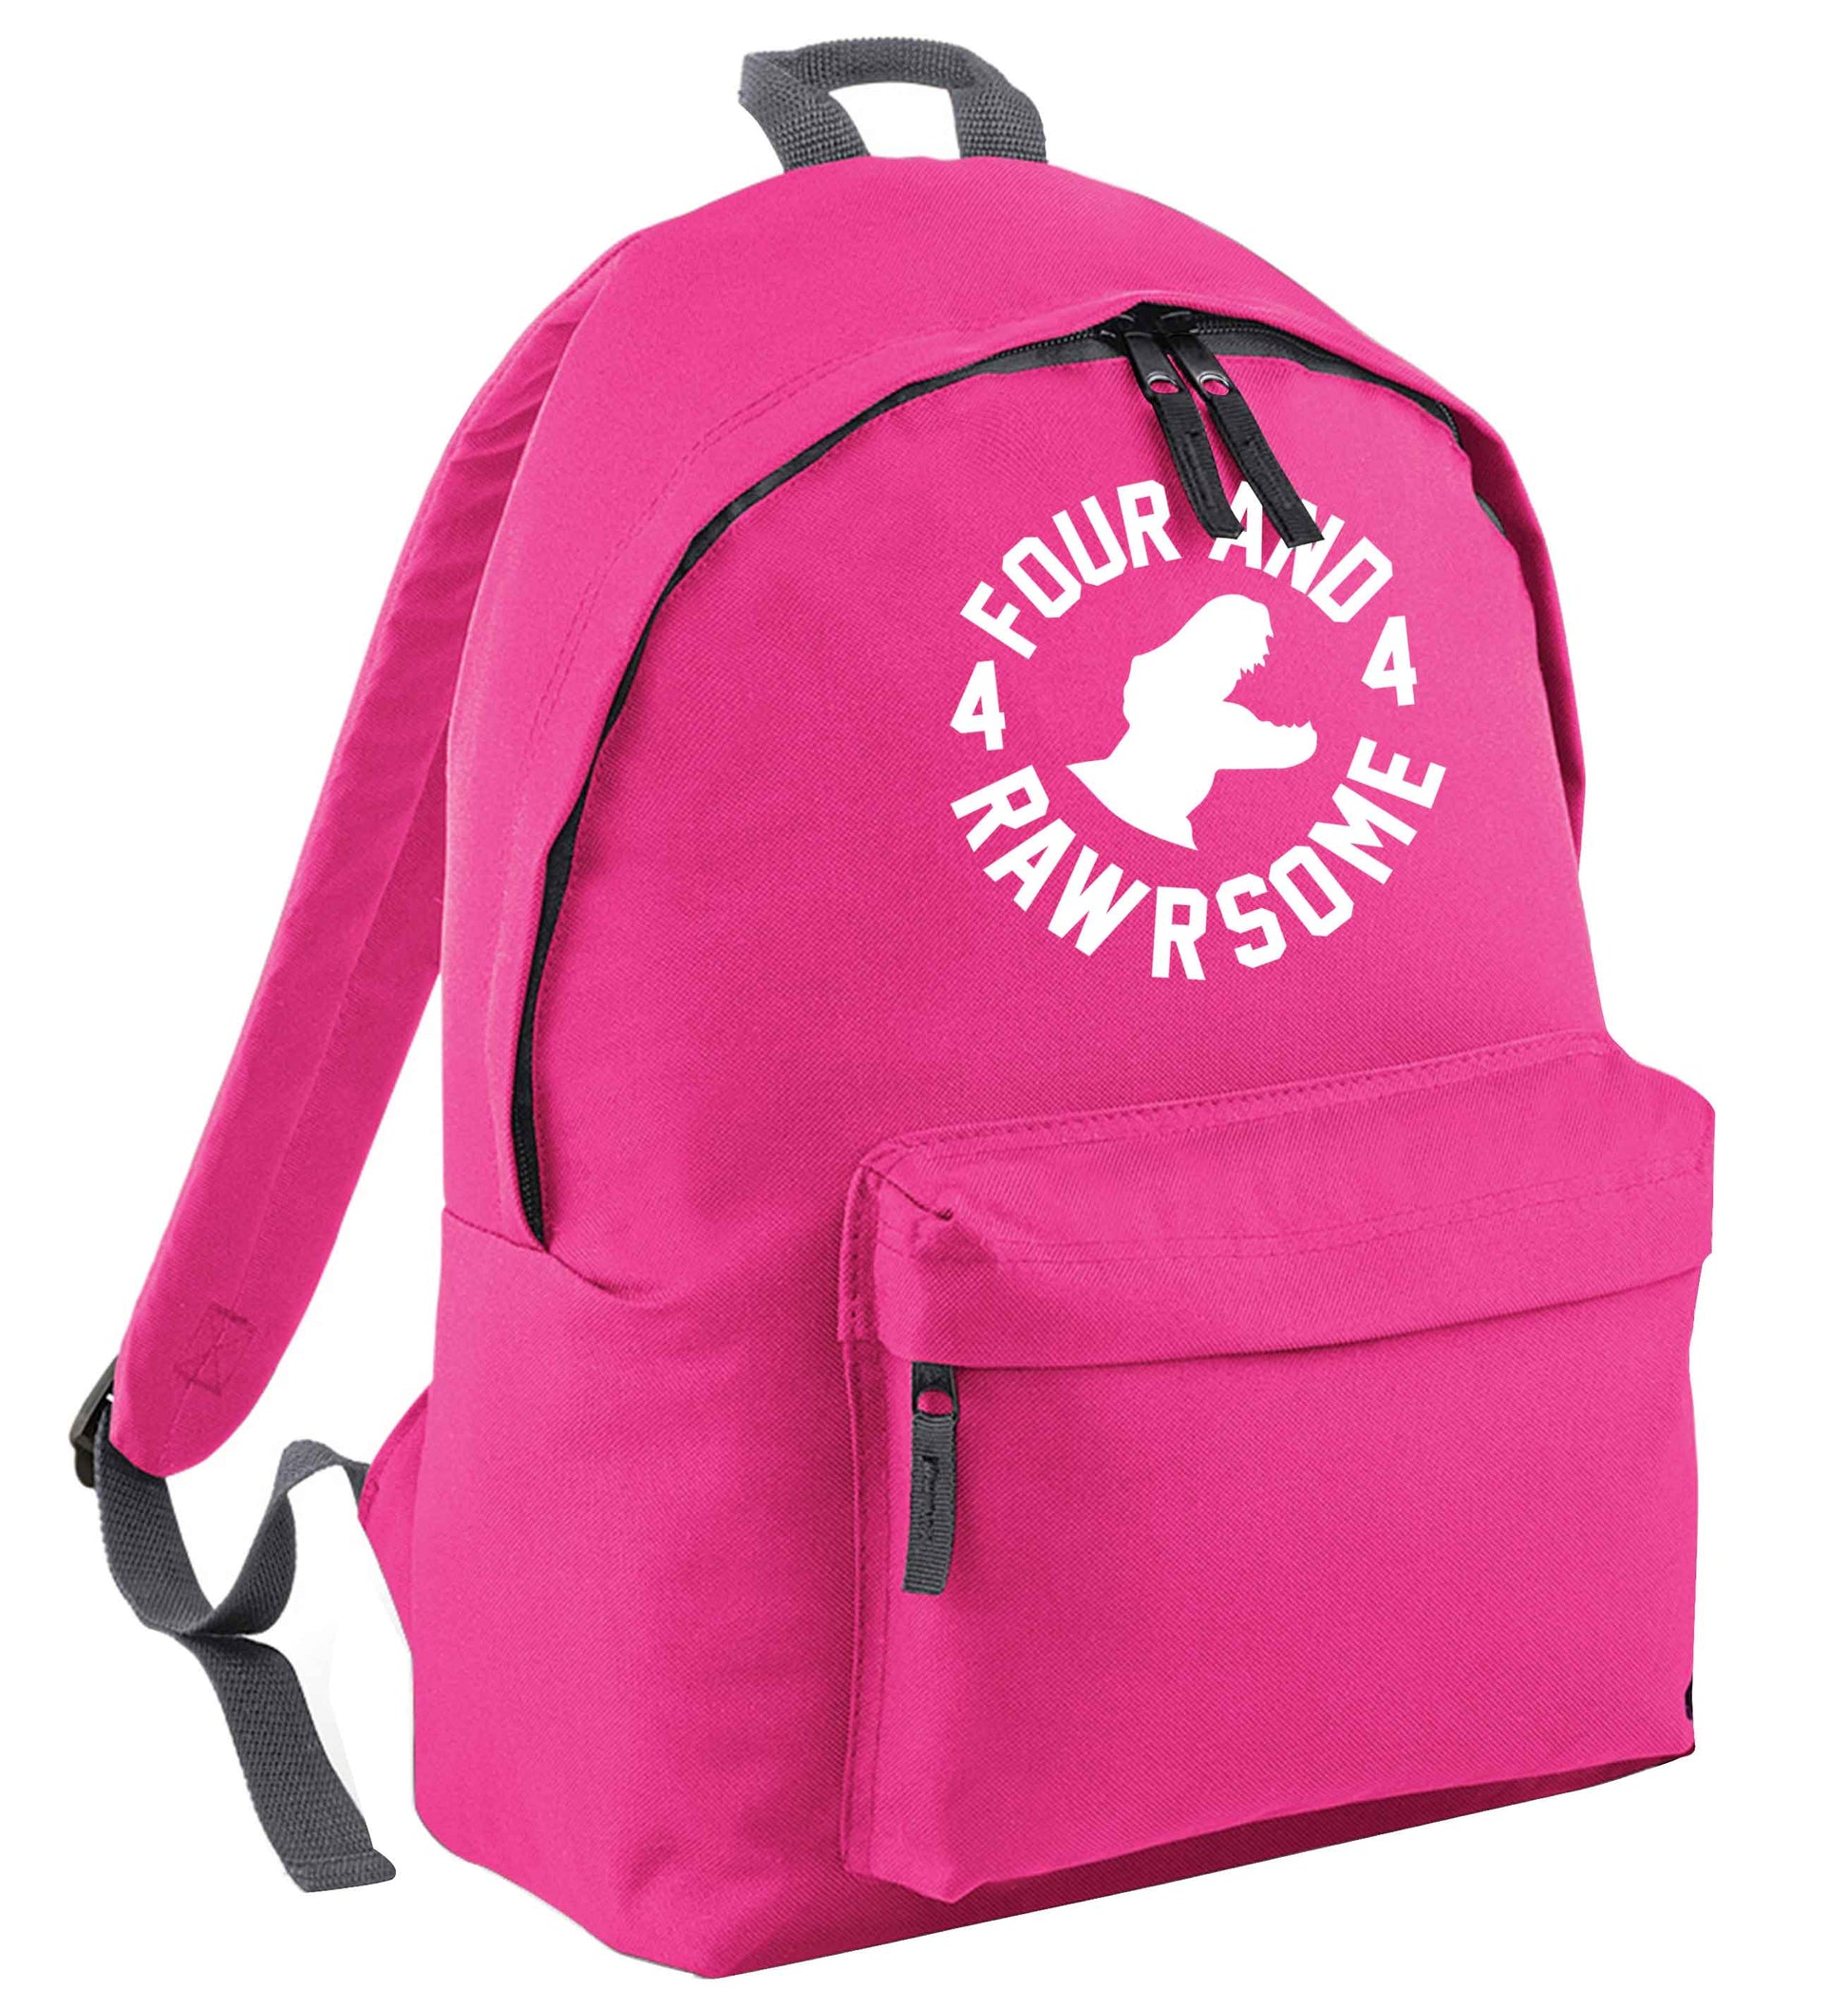 Four and rawrsome pink adults backpack